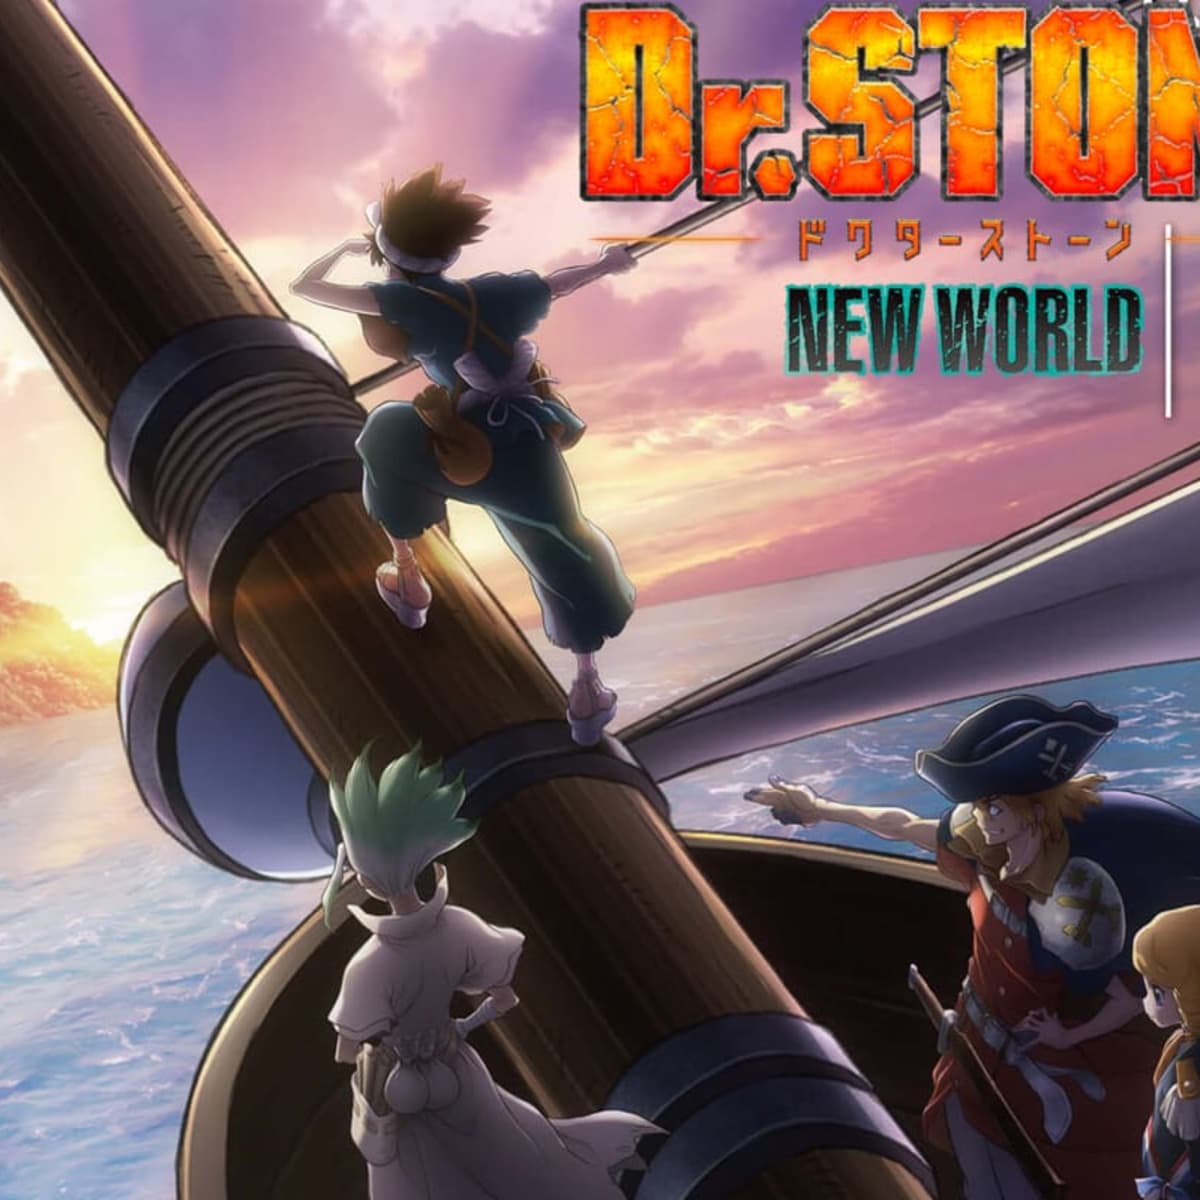 Dr. Stone Season 3 Part 2 - Release date, time, what to expect and